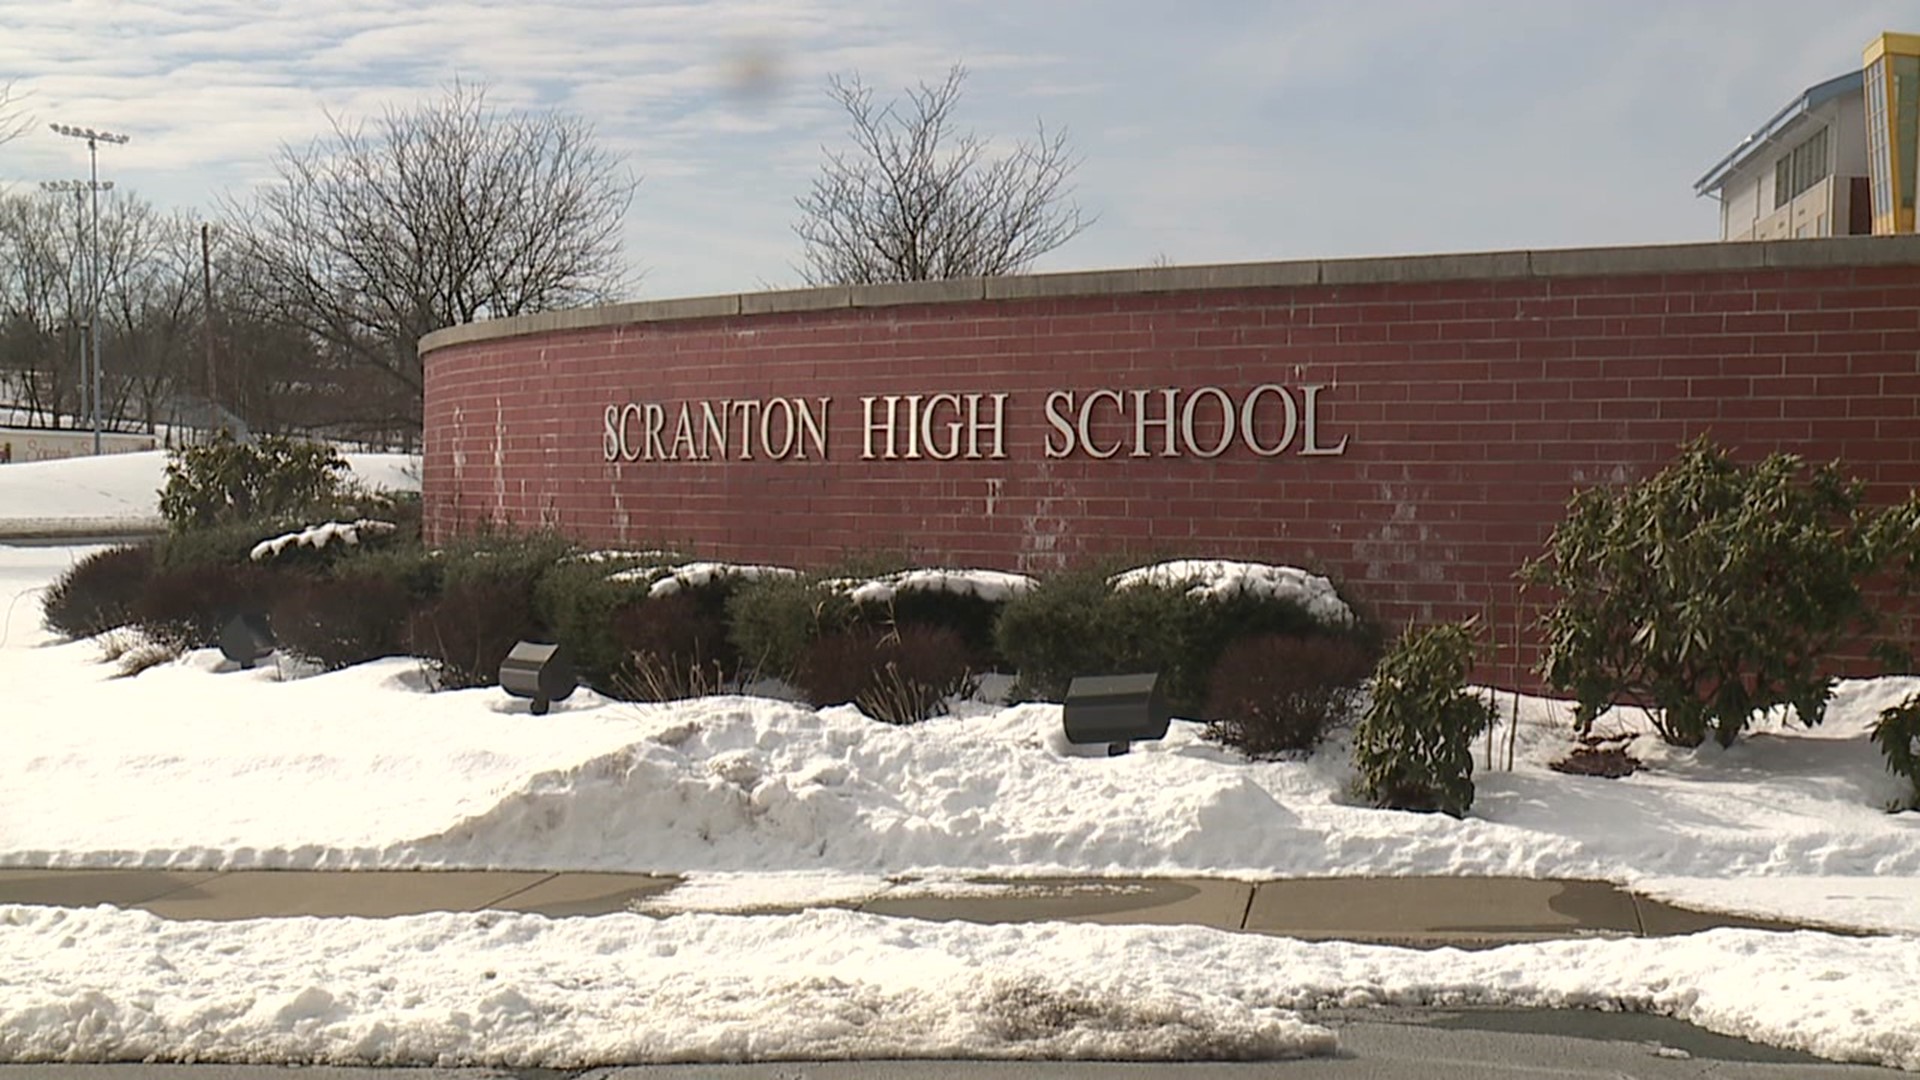 Returning to classrooms amid the pandemic is a controversial topic in city school districts across the country, and the city of Scranton is no different.